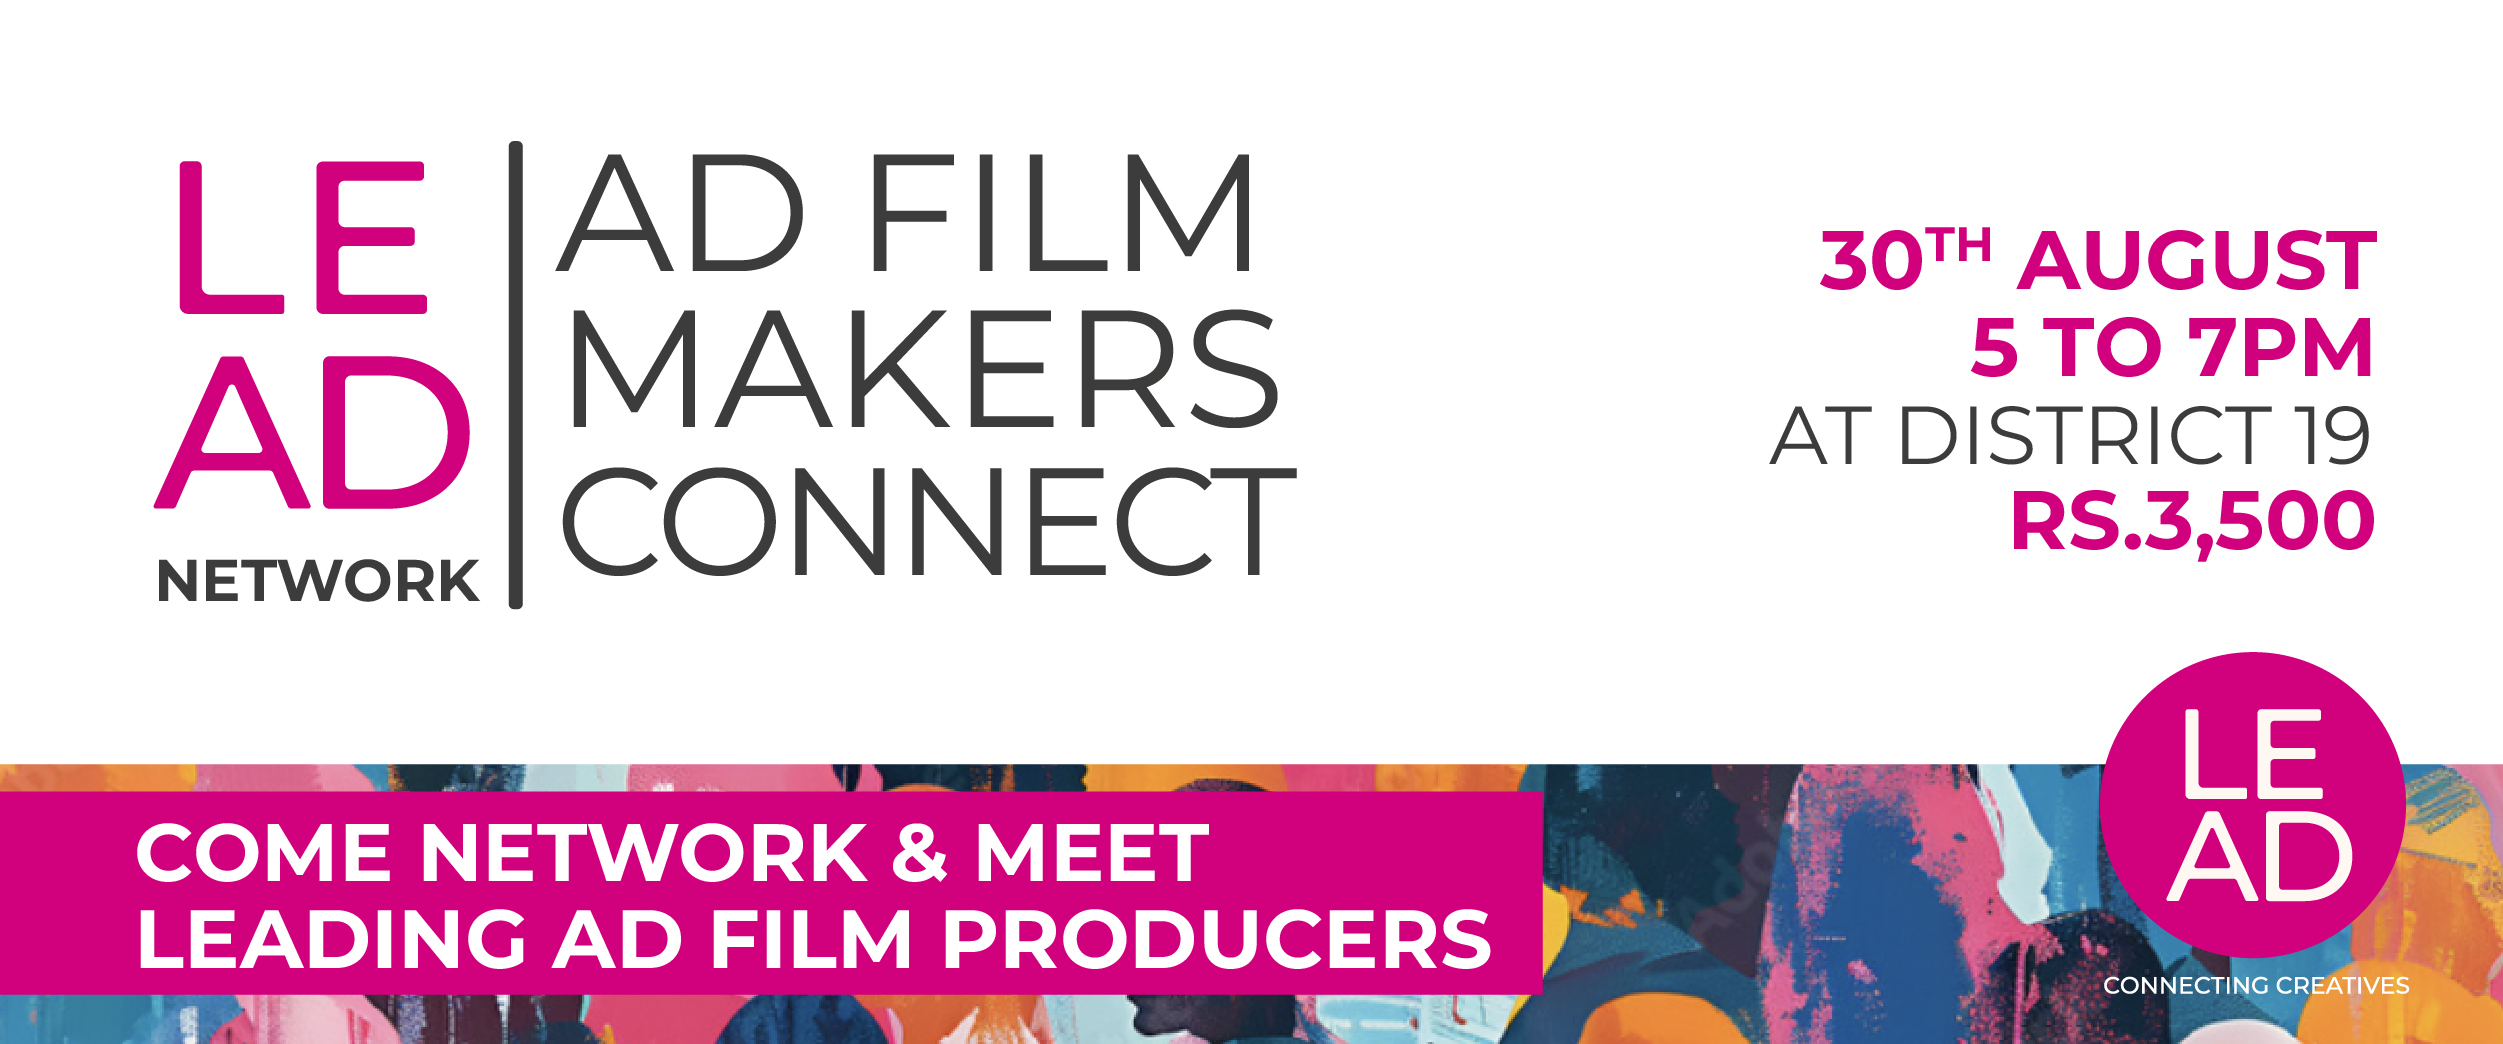 Lead Ad Filmmakers Connect